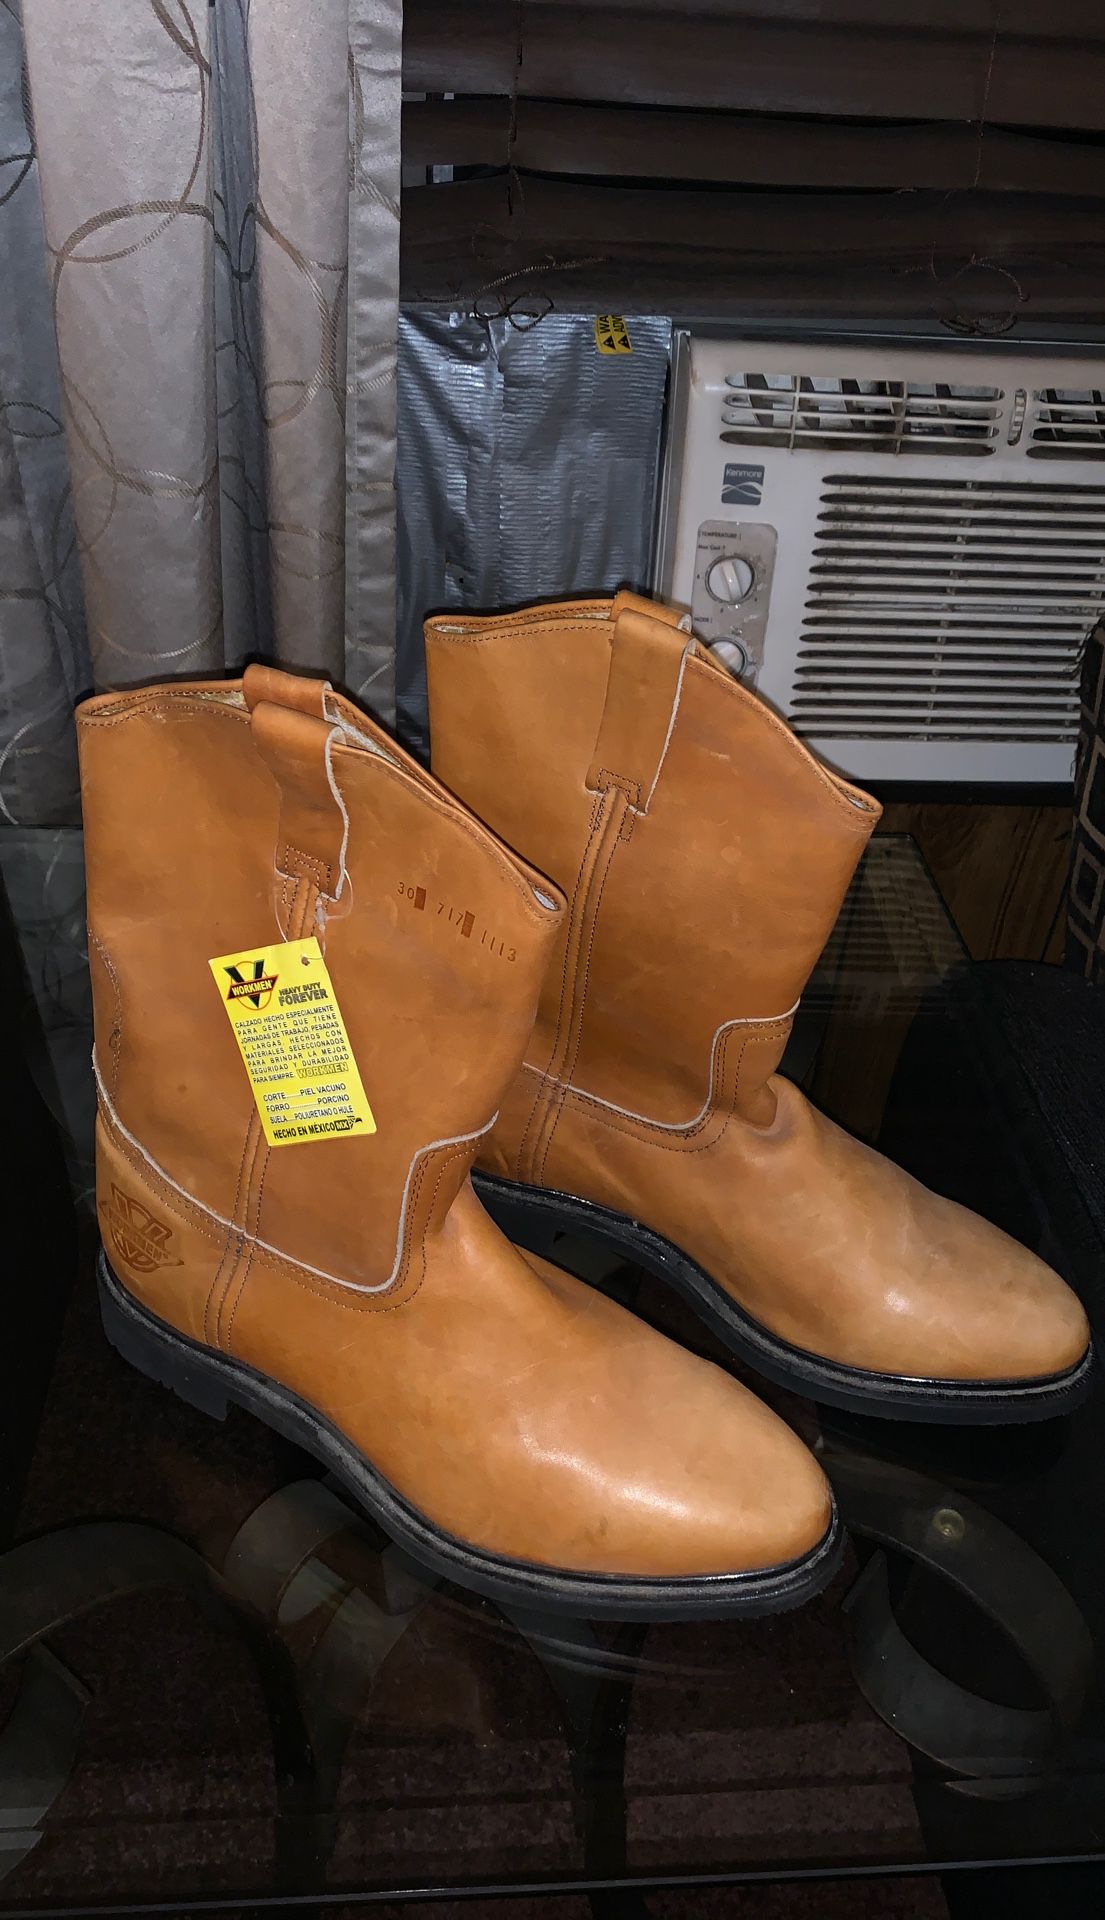 Work boots butter color $55